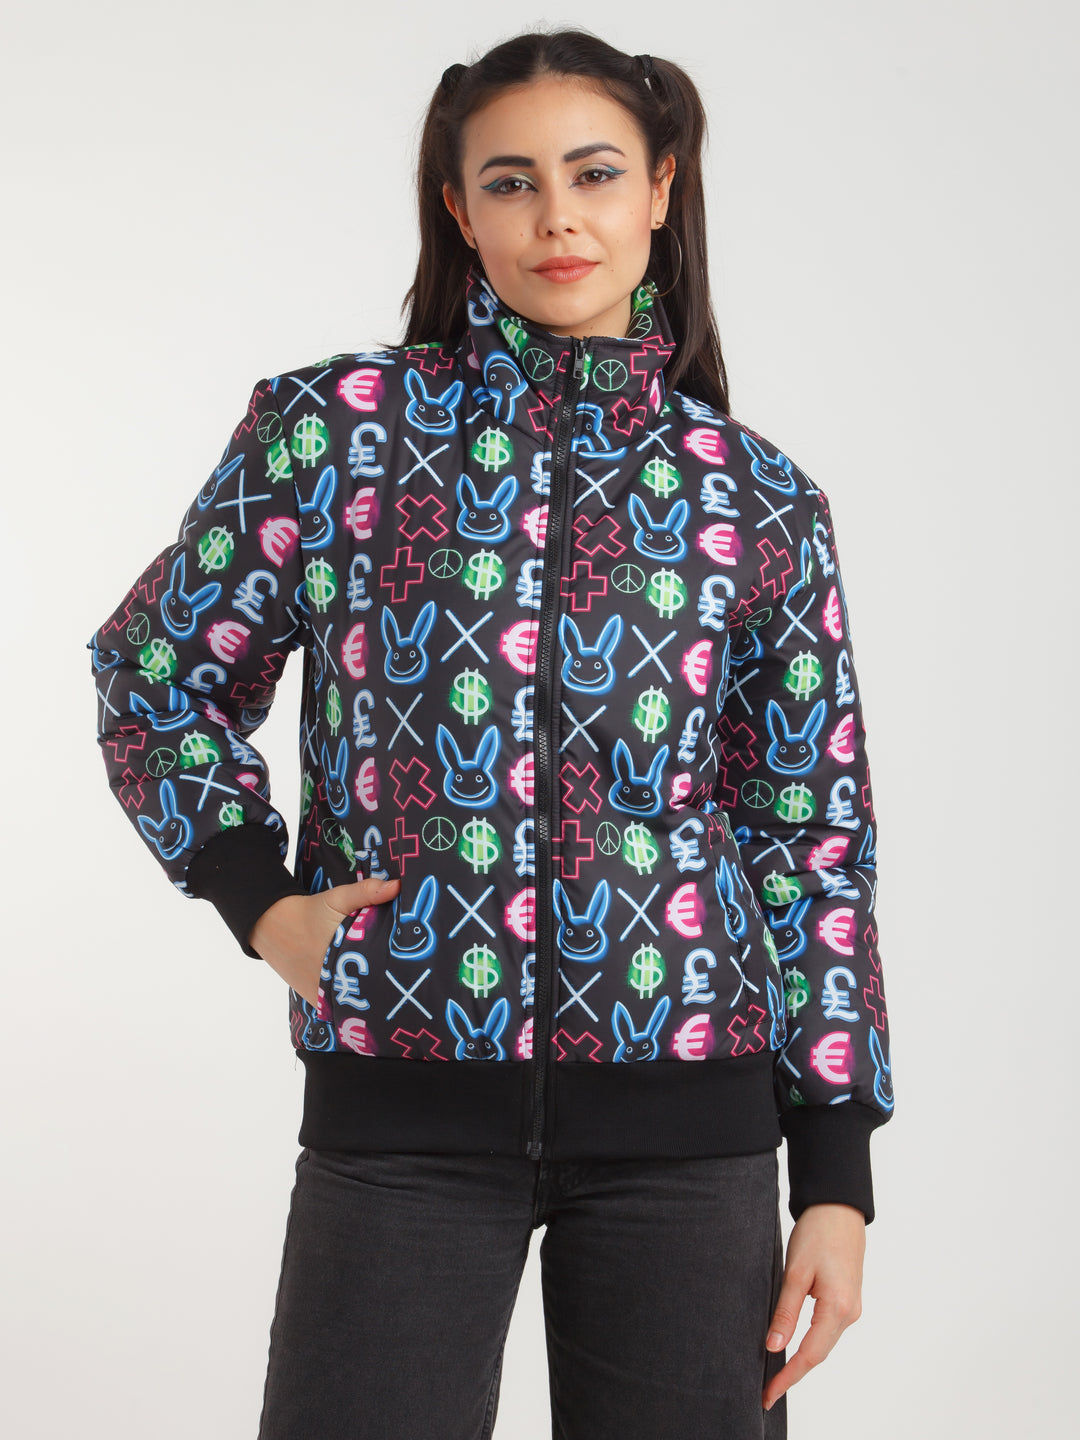 Black Graphic Print Jacket For Women